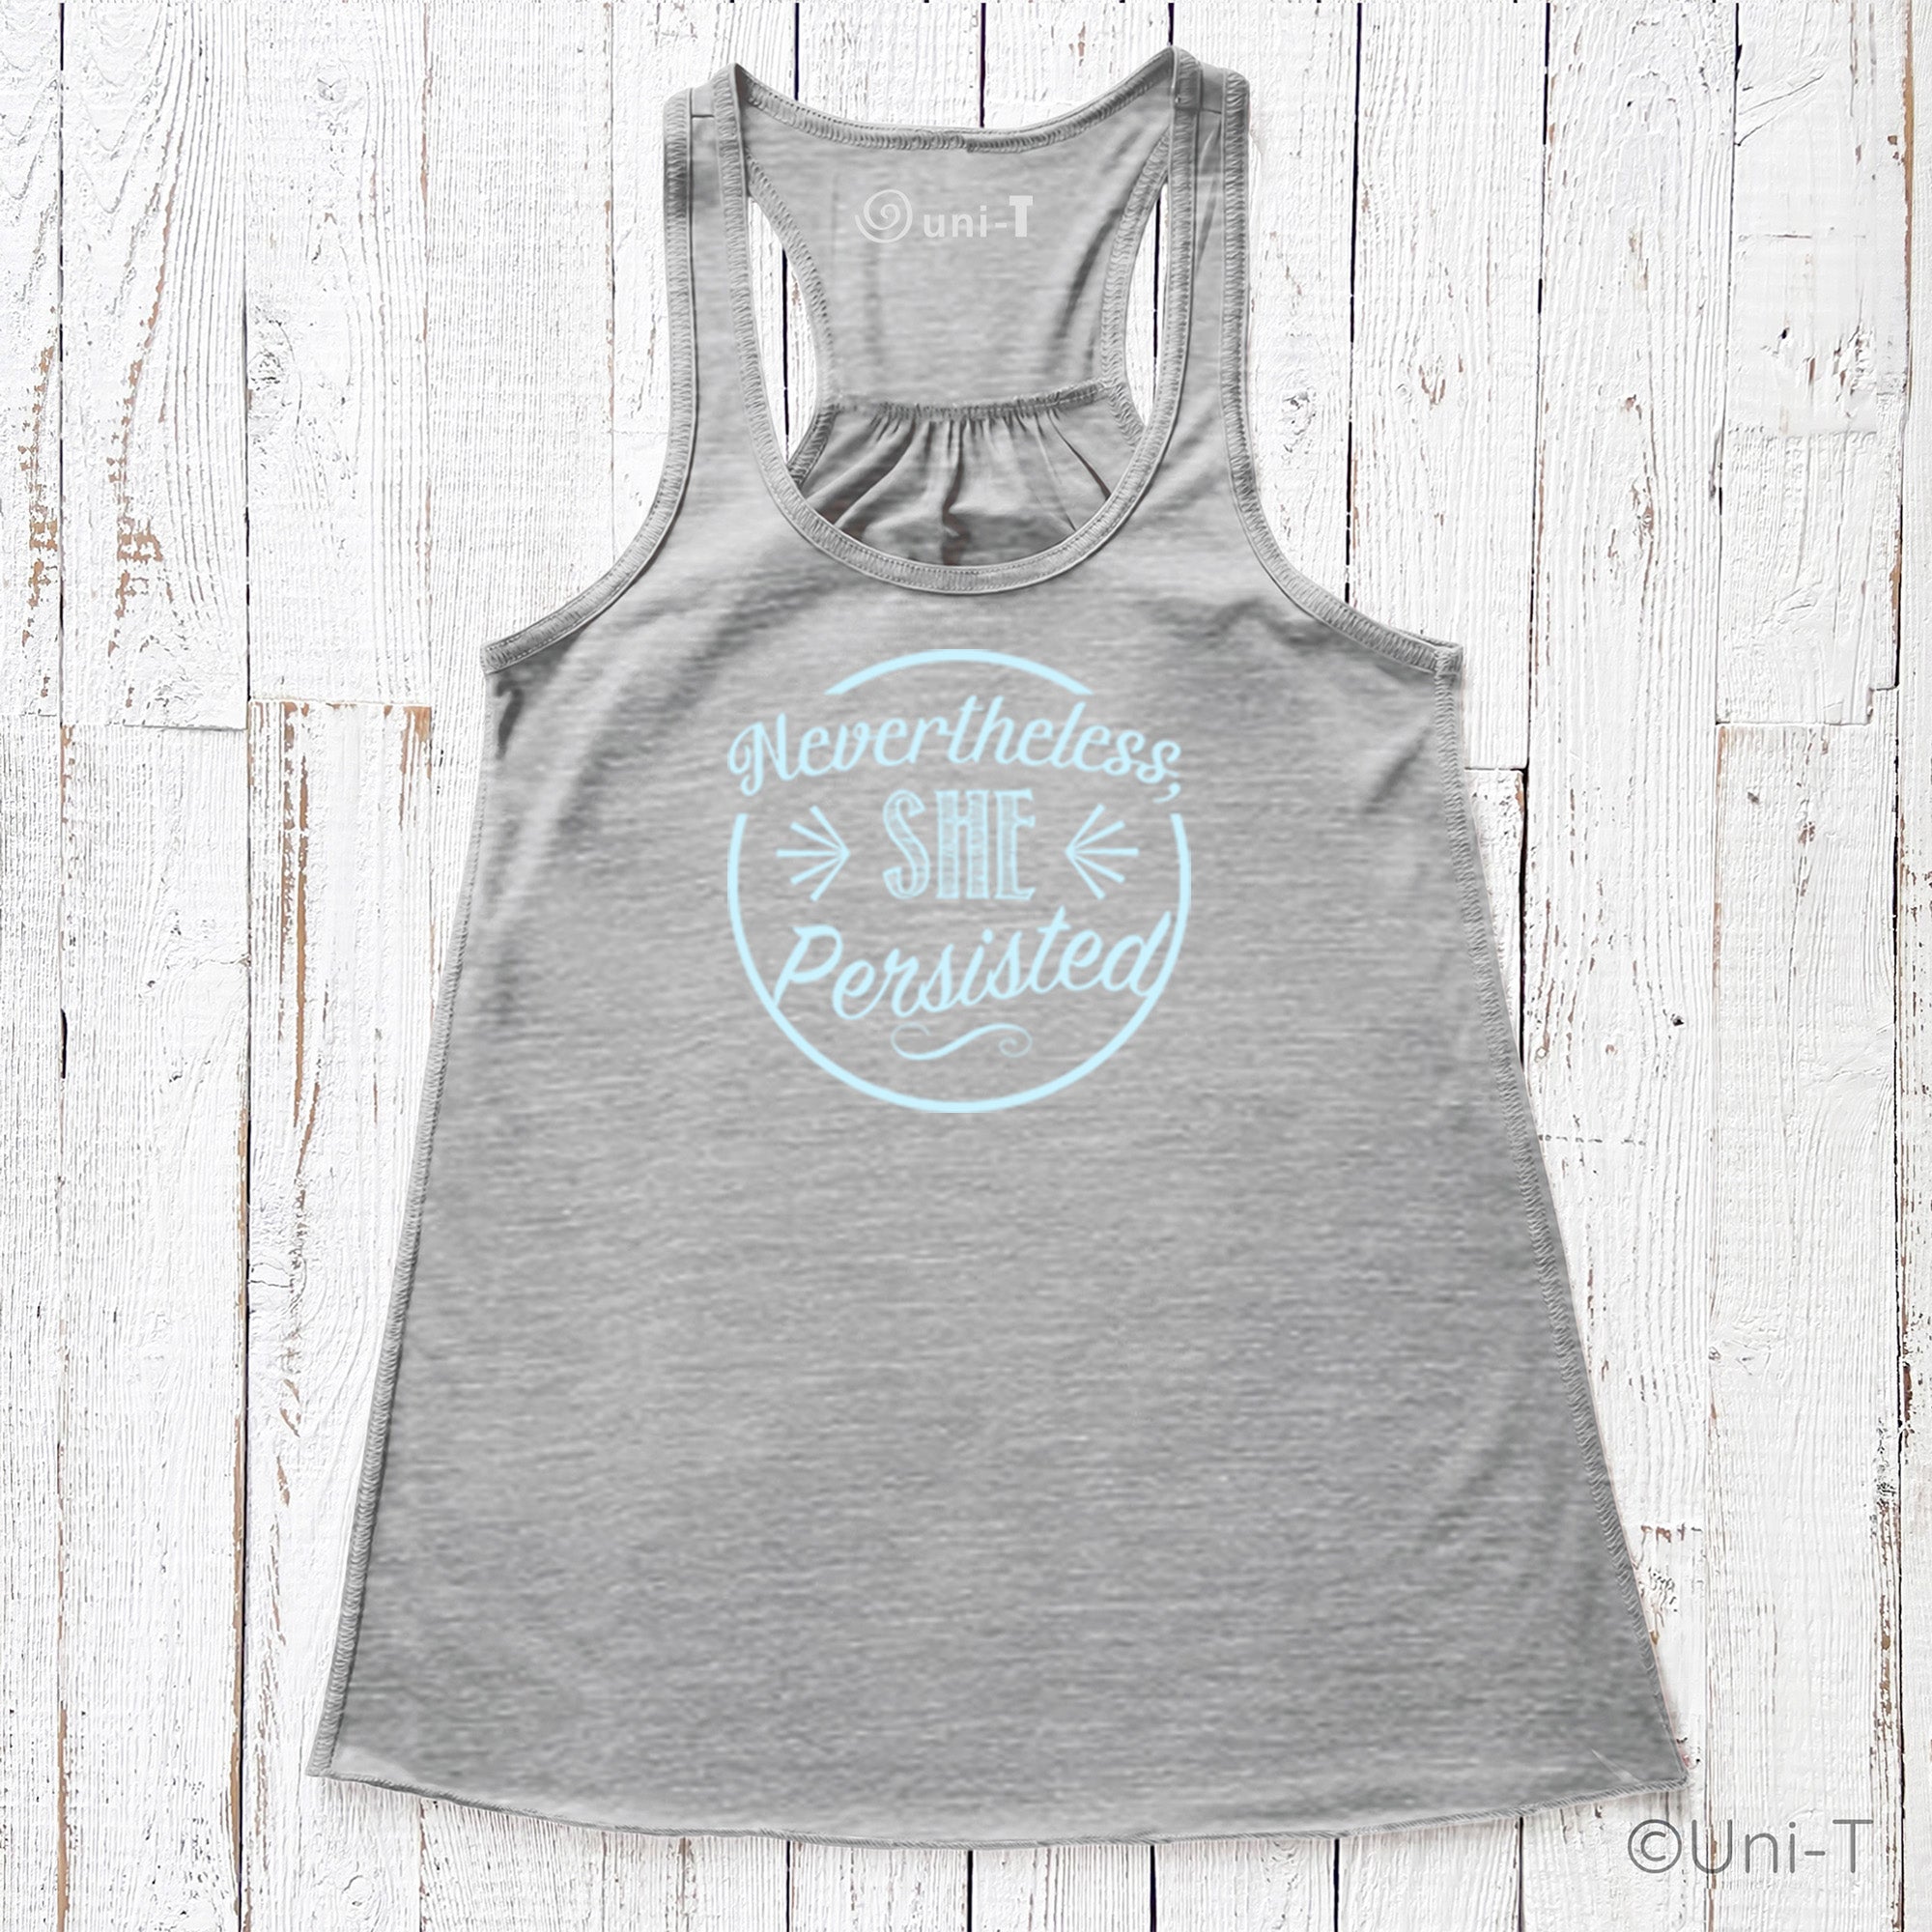 Nevertheless She Persisted Flowy Tank Top Uni-T